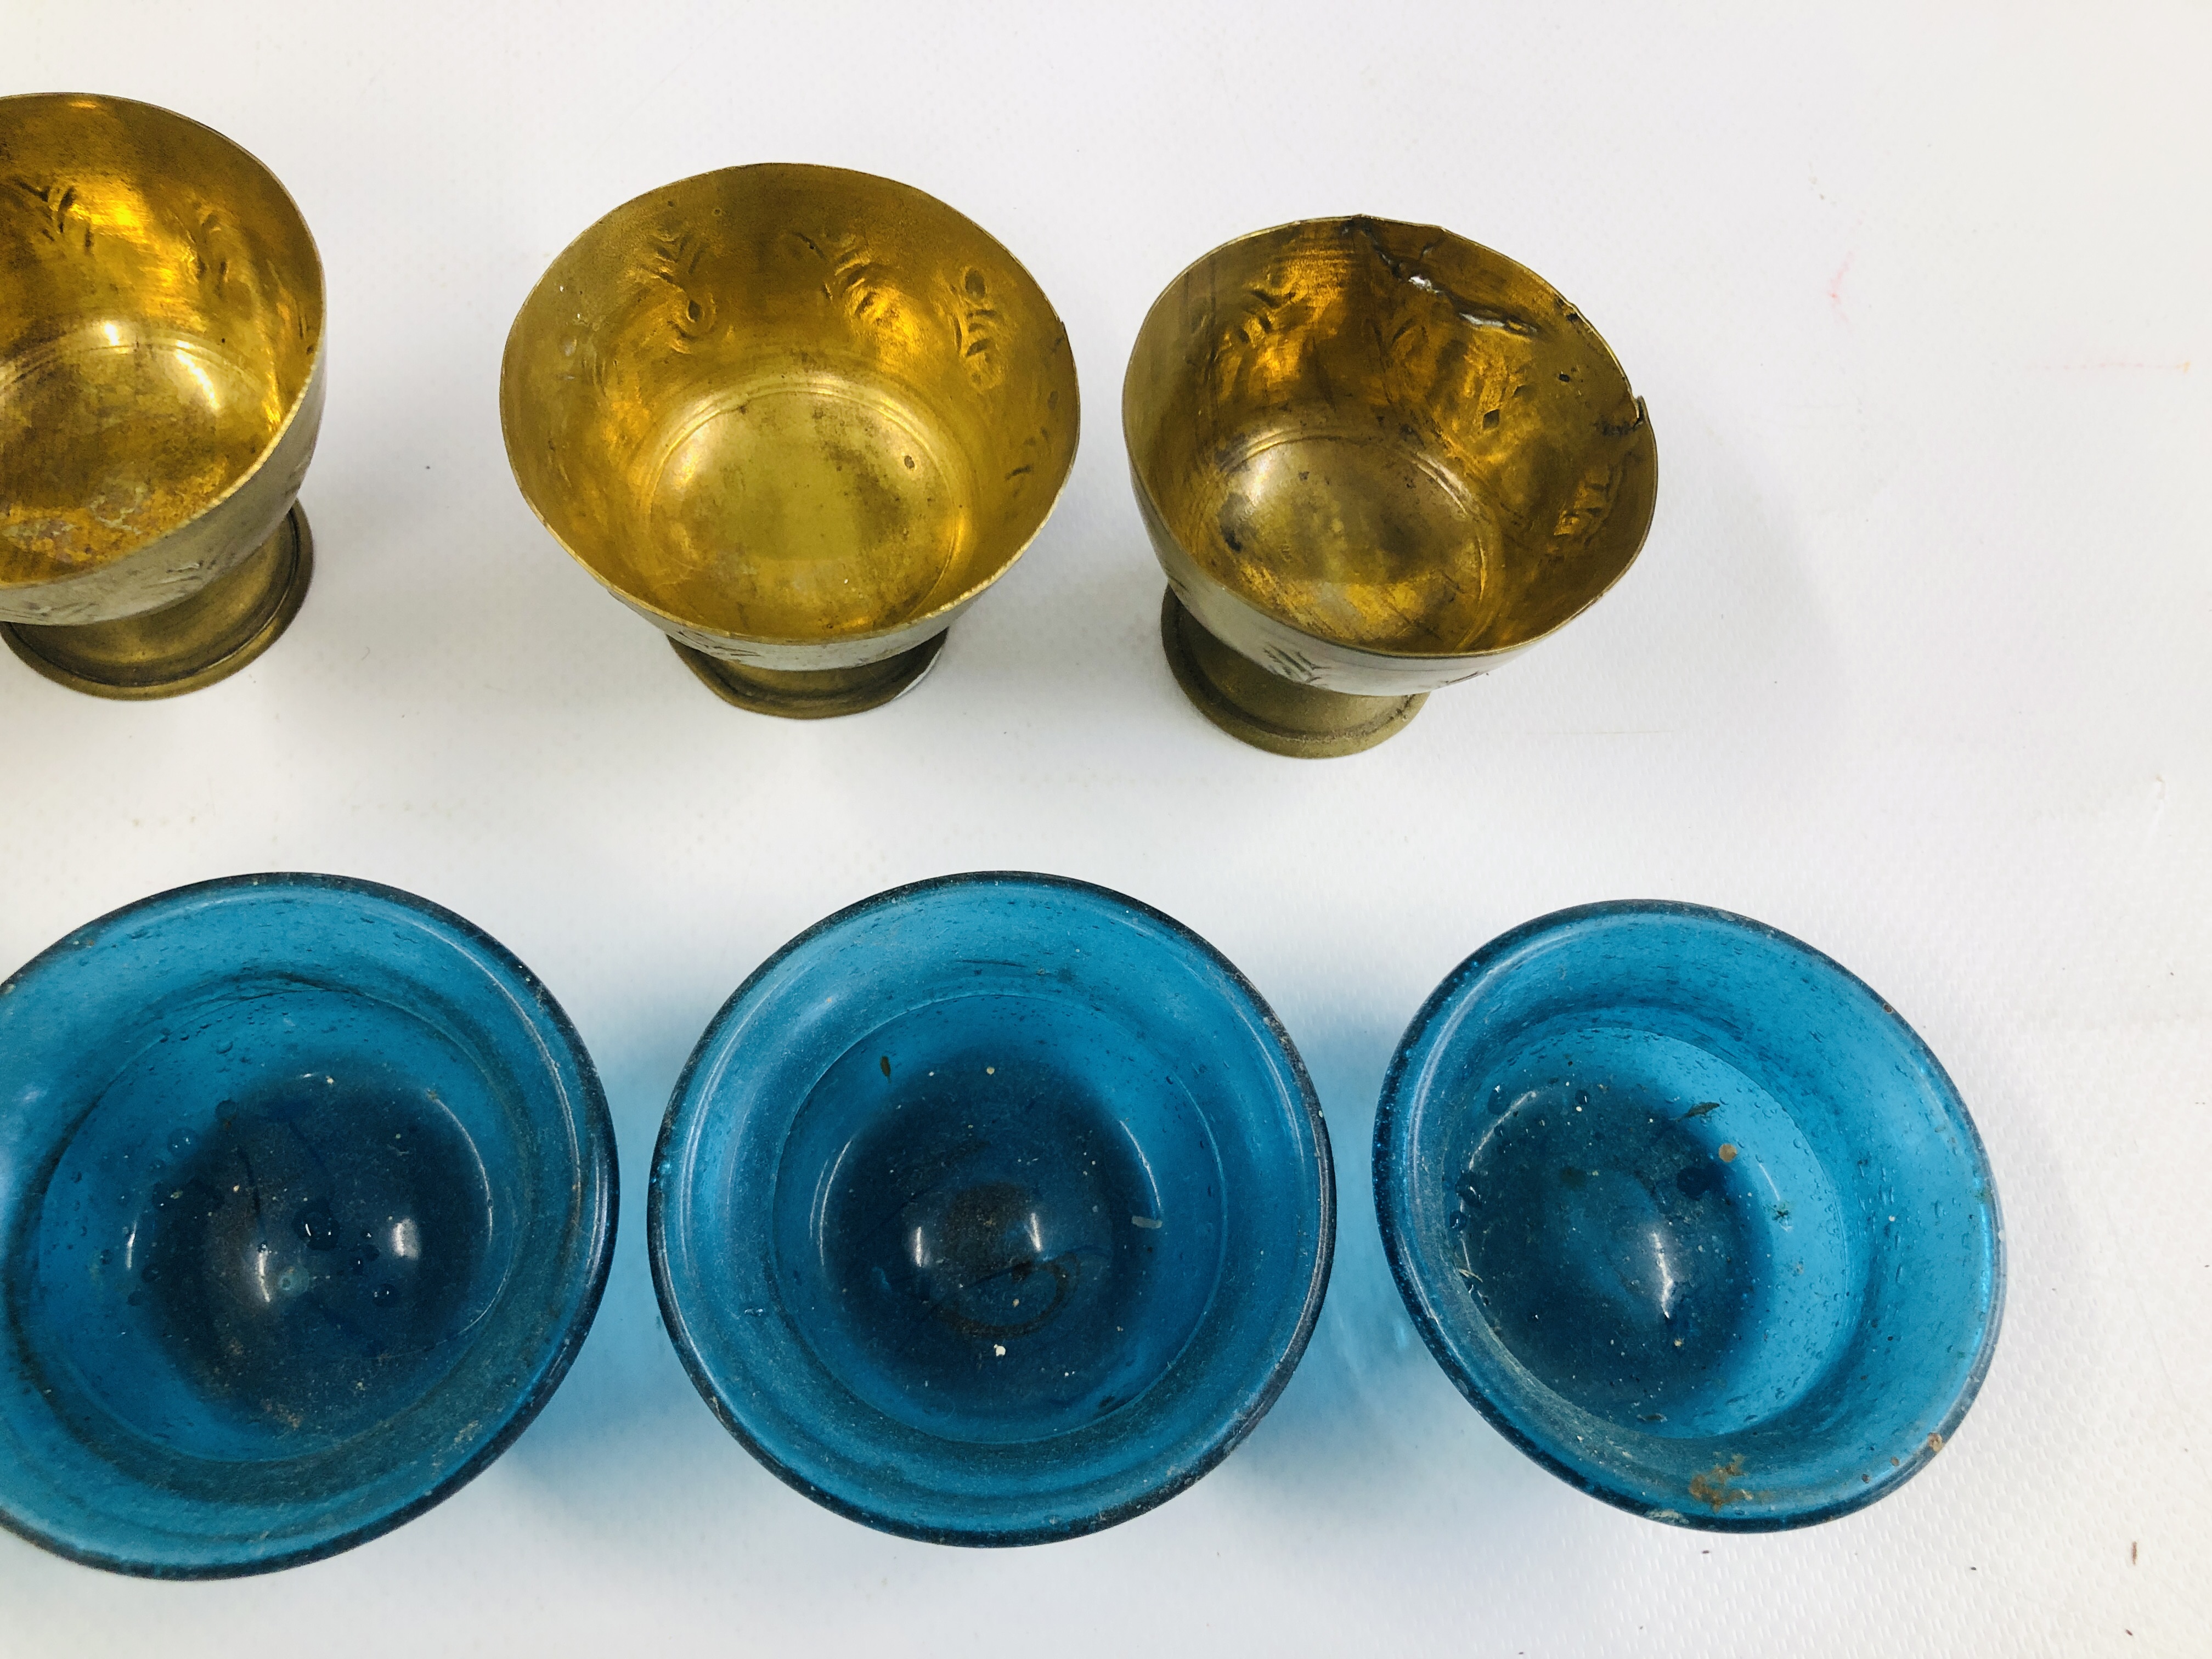 A SET OF SIX MIDDLE EASTERN BRASS GOBLET VESSELS WITH BLUE GLASS LINERS. - Image 10 of 11